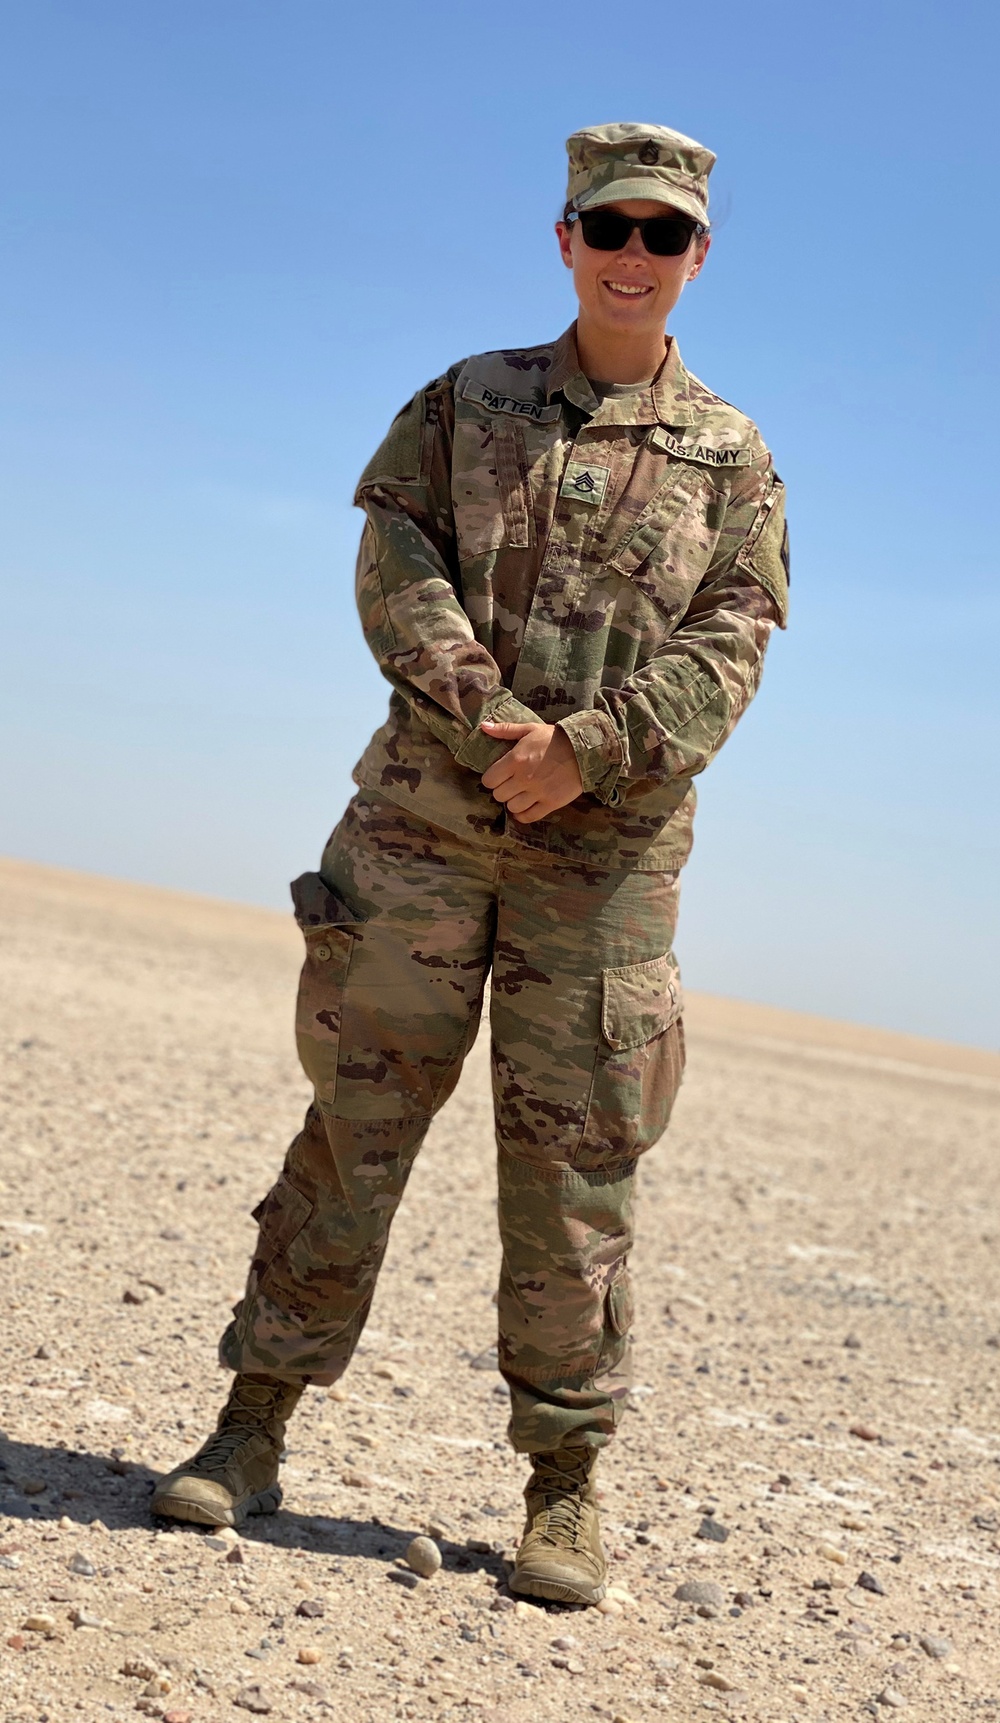 ILLINOIS ARMY NATIONAL GUARD SOLDIER SELECTED FOR ALL-ARMY WOMEN’S SOFTBALL TEAM